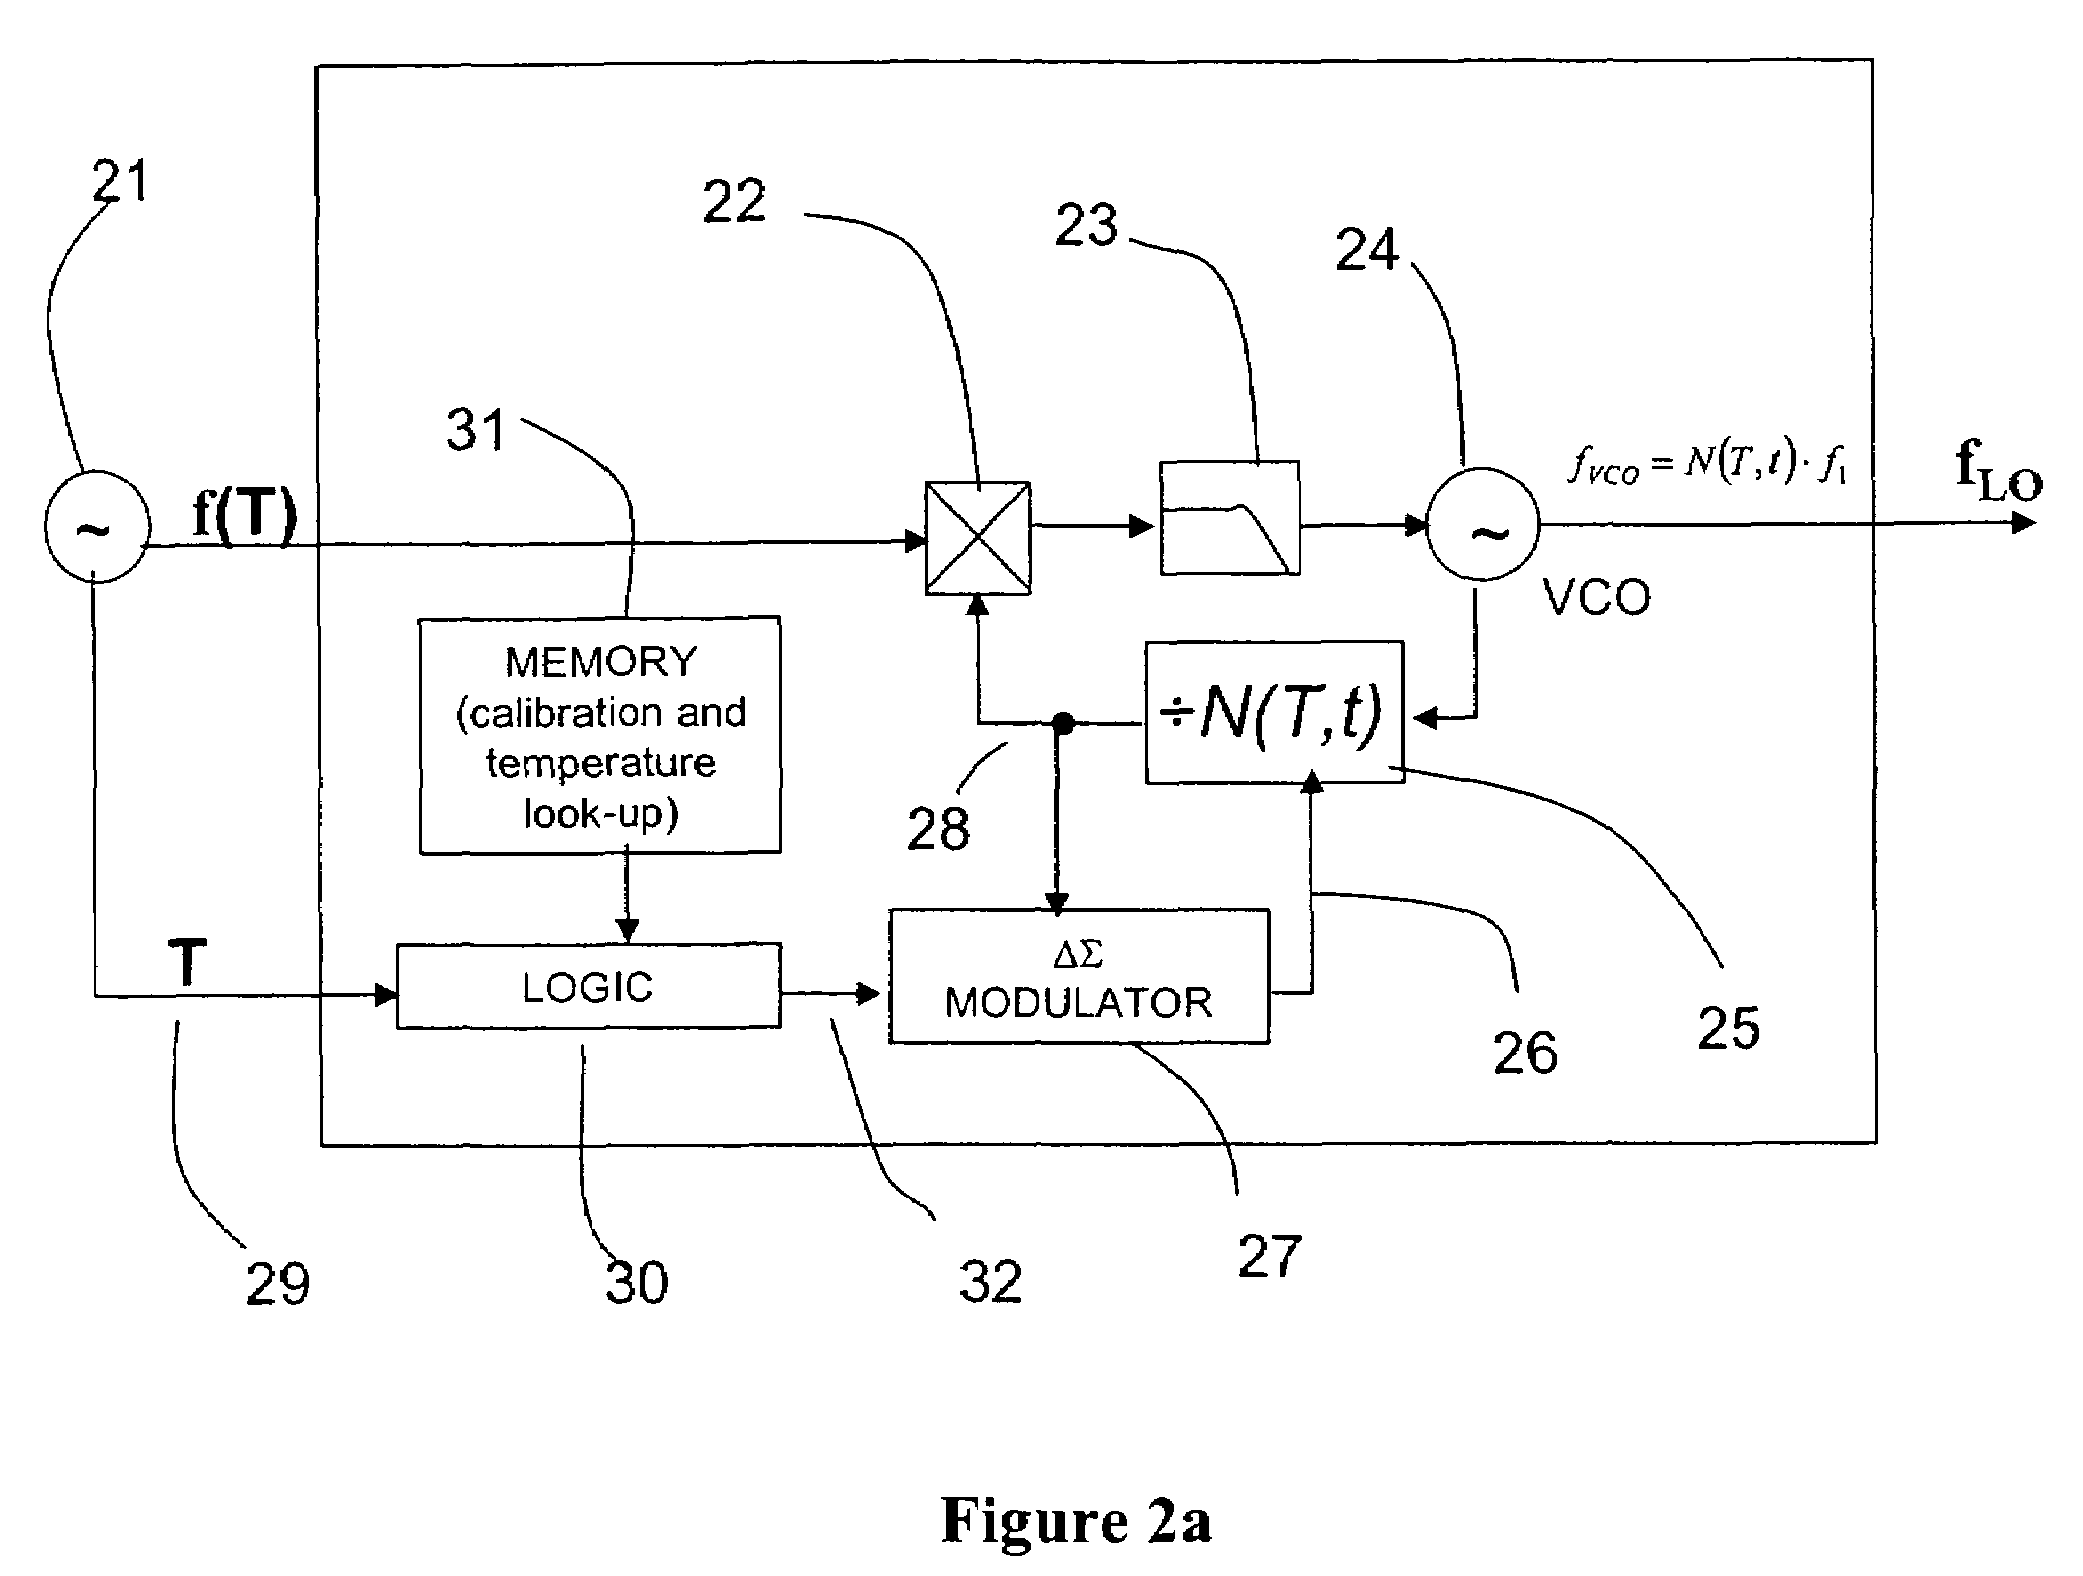 Multi-mode frequency synthesizer with temperature compensation